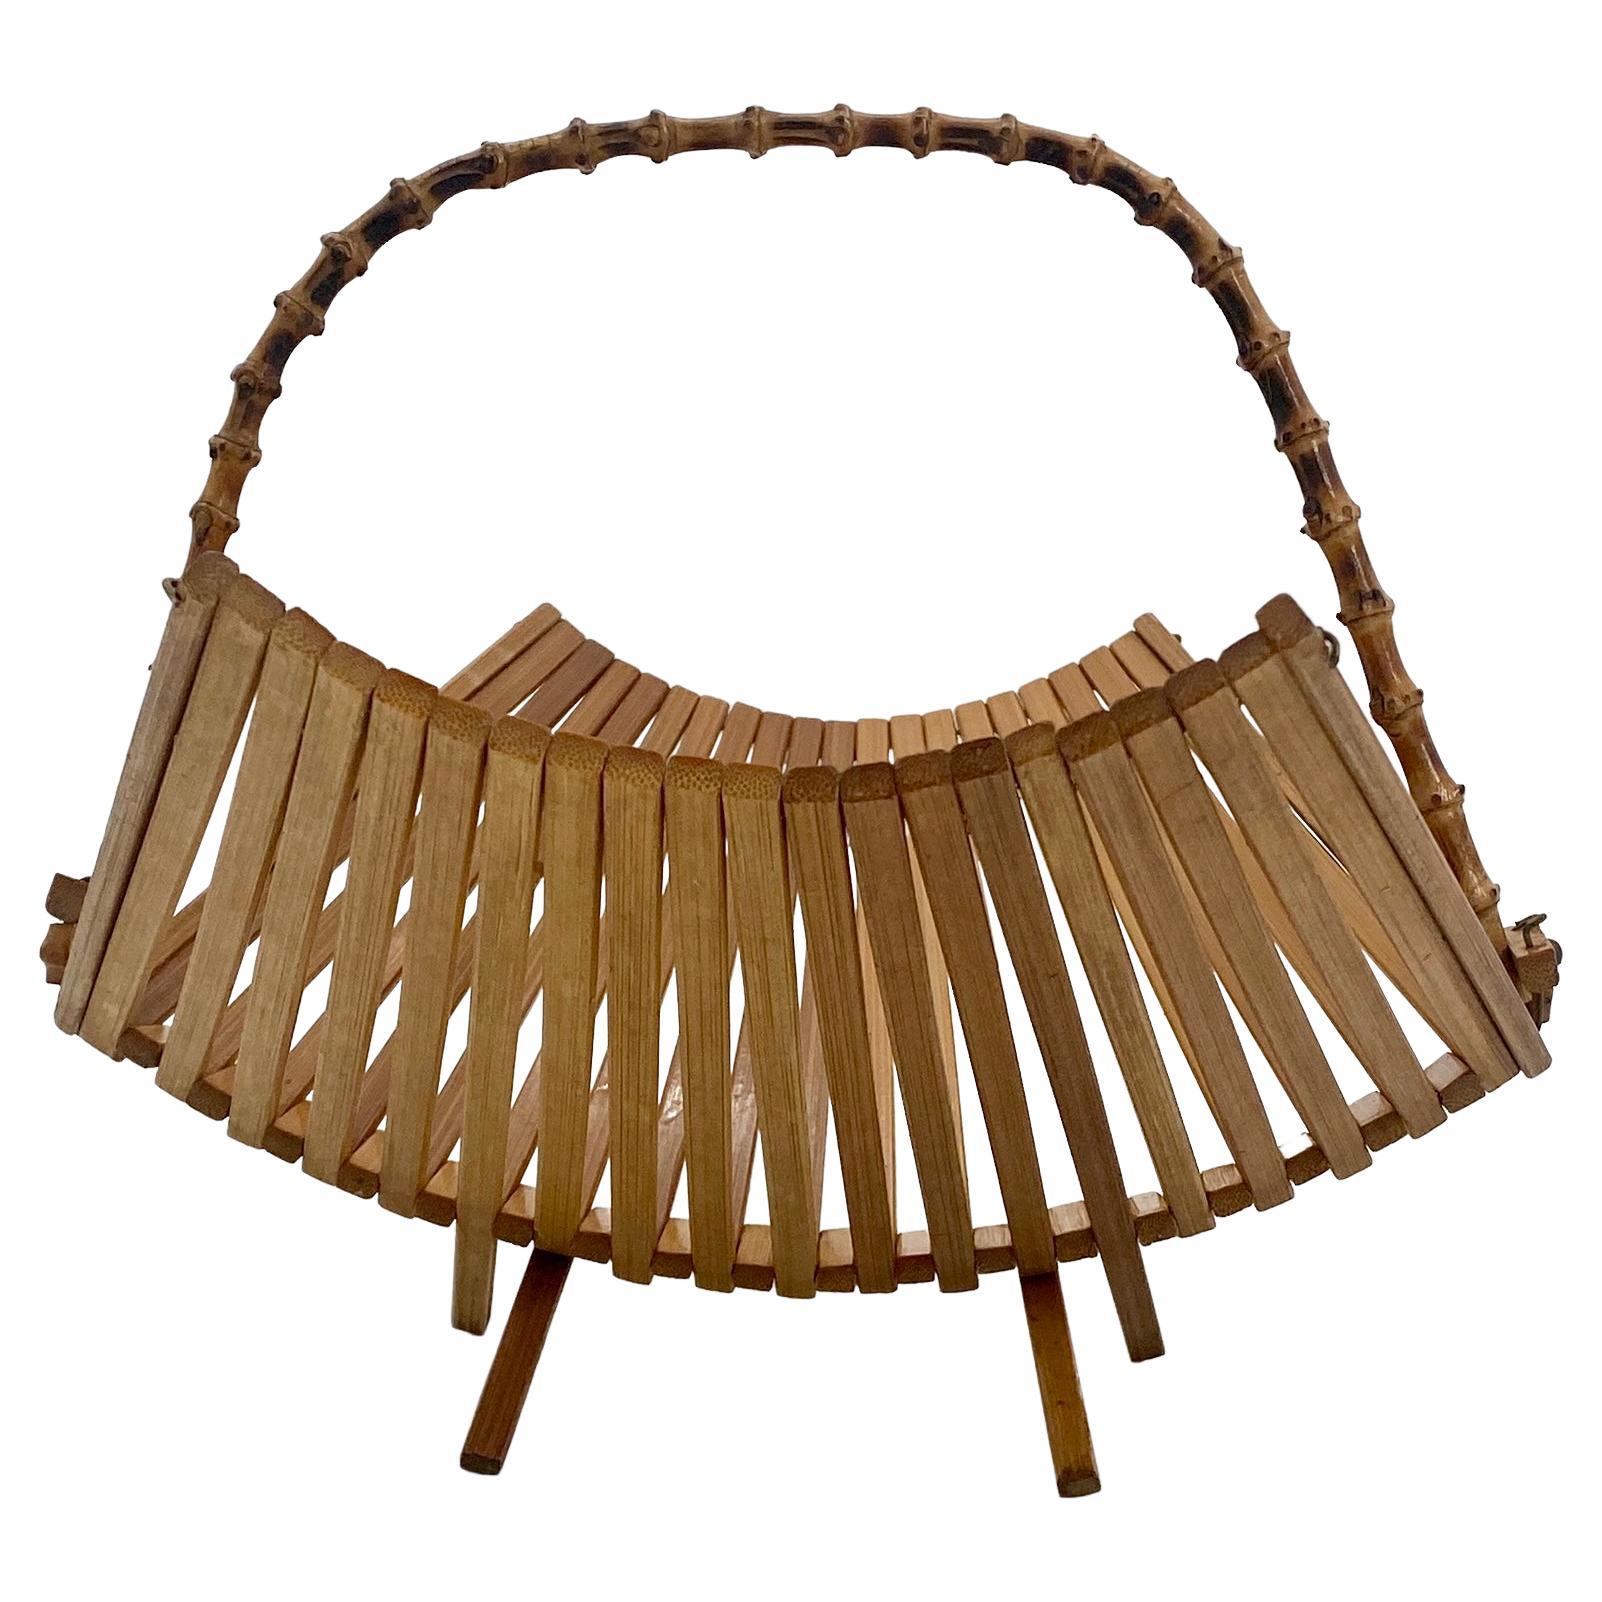 Organic Modern Architectural Bread or Fruit Kitchen Basket with Bamboo Handle, Denmark